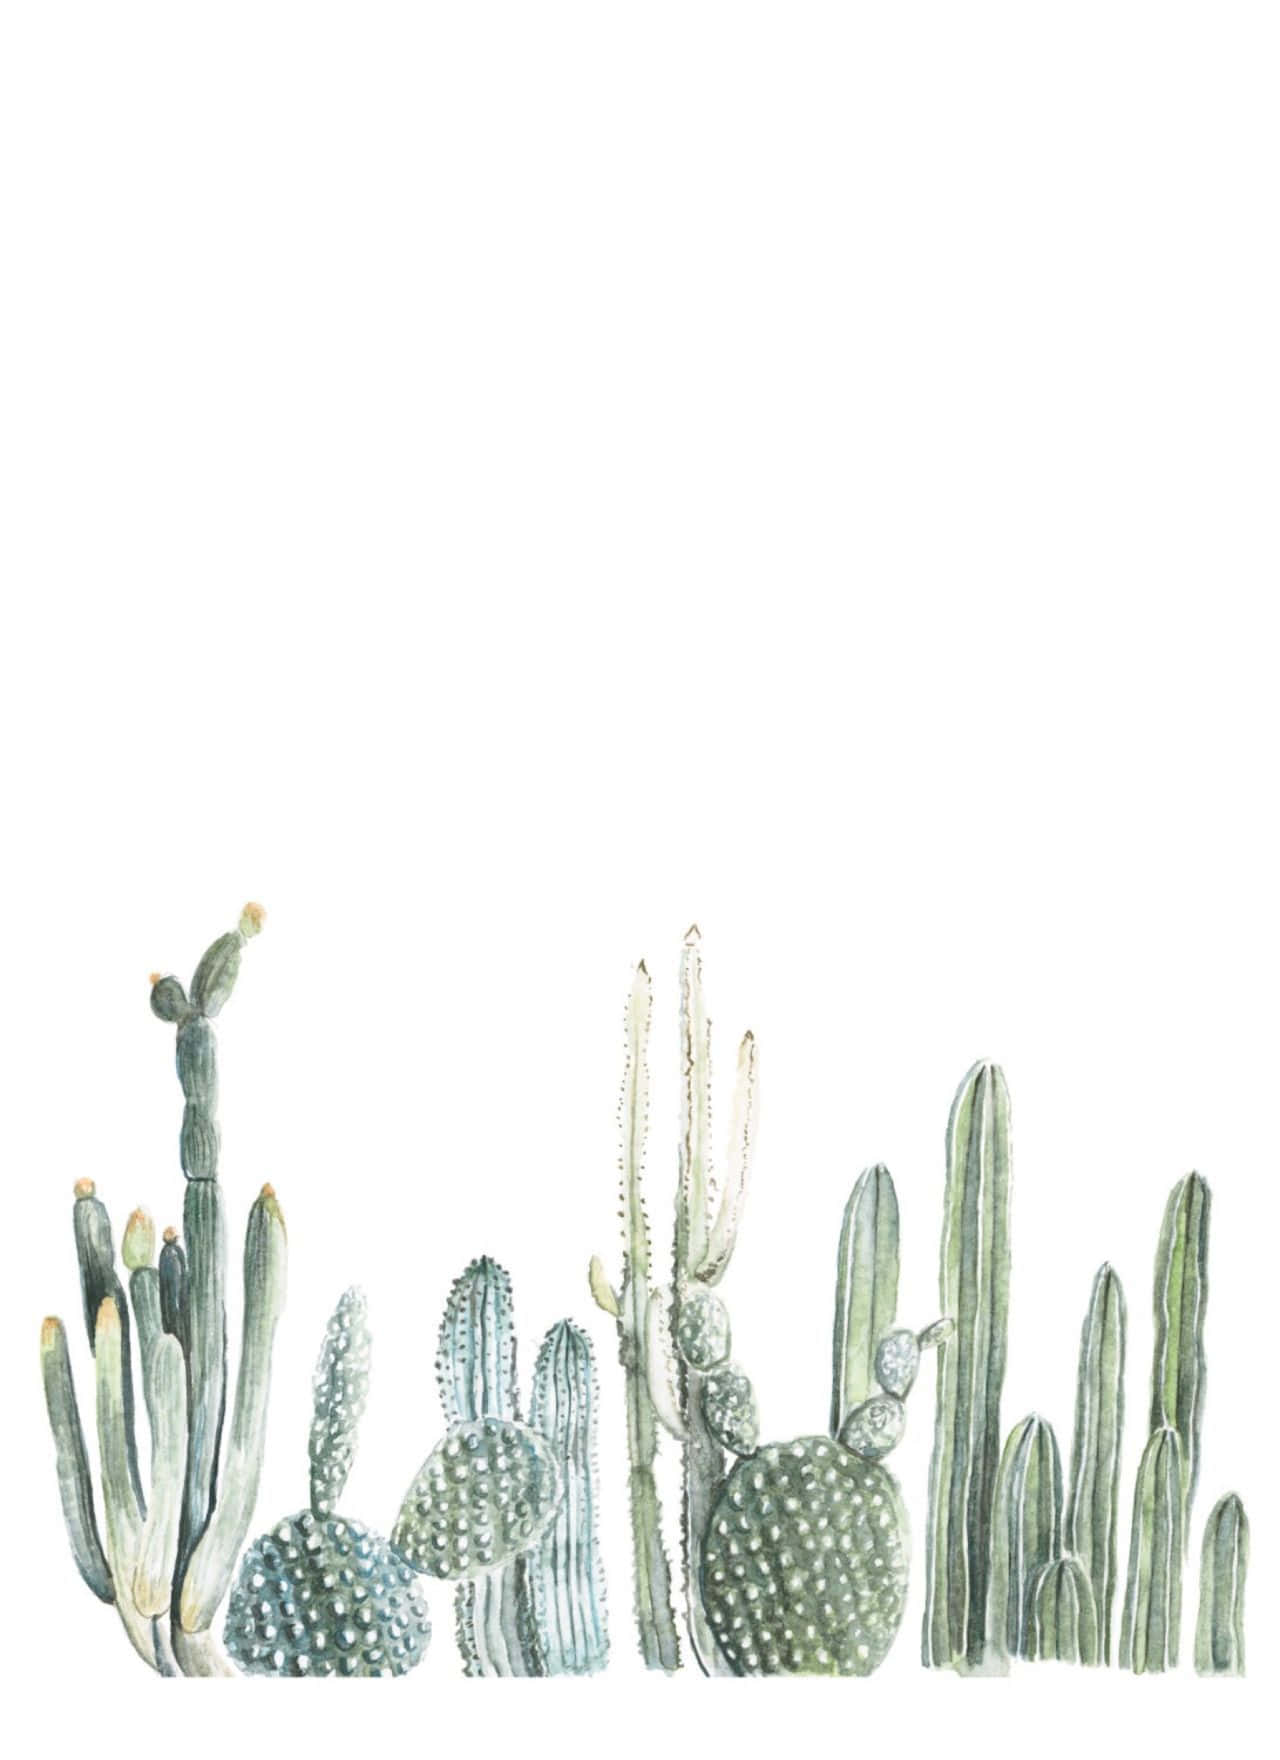 Caption: Captivating Beauty of Aesthetic Cactus Wallpaper